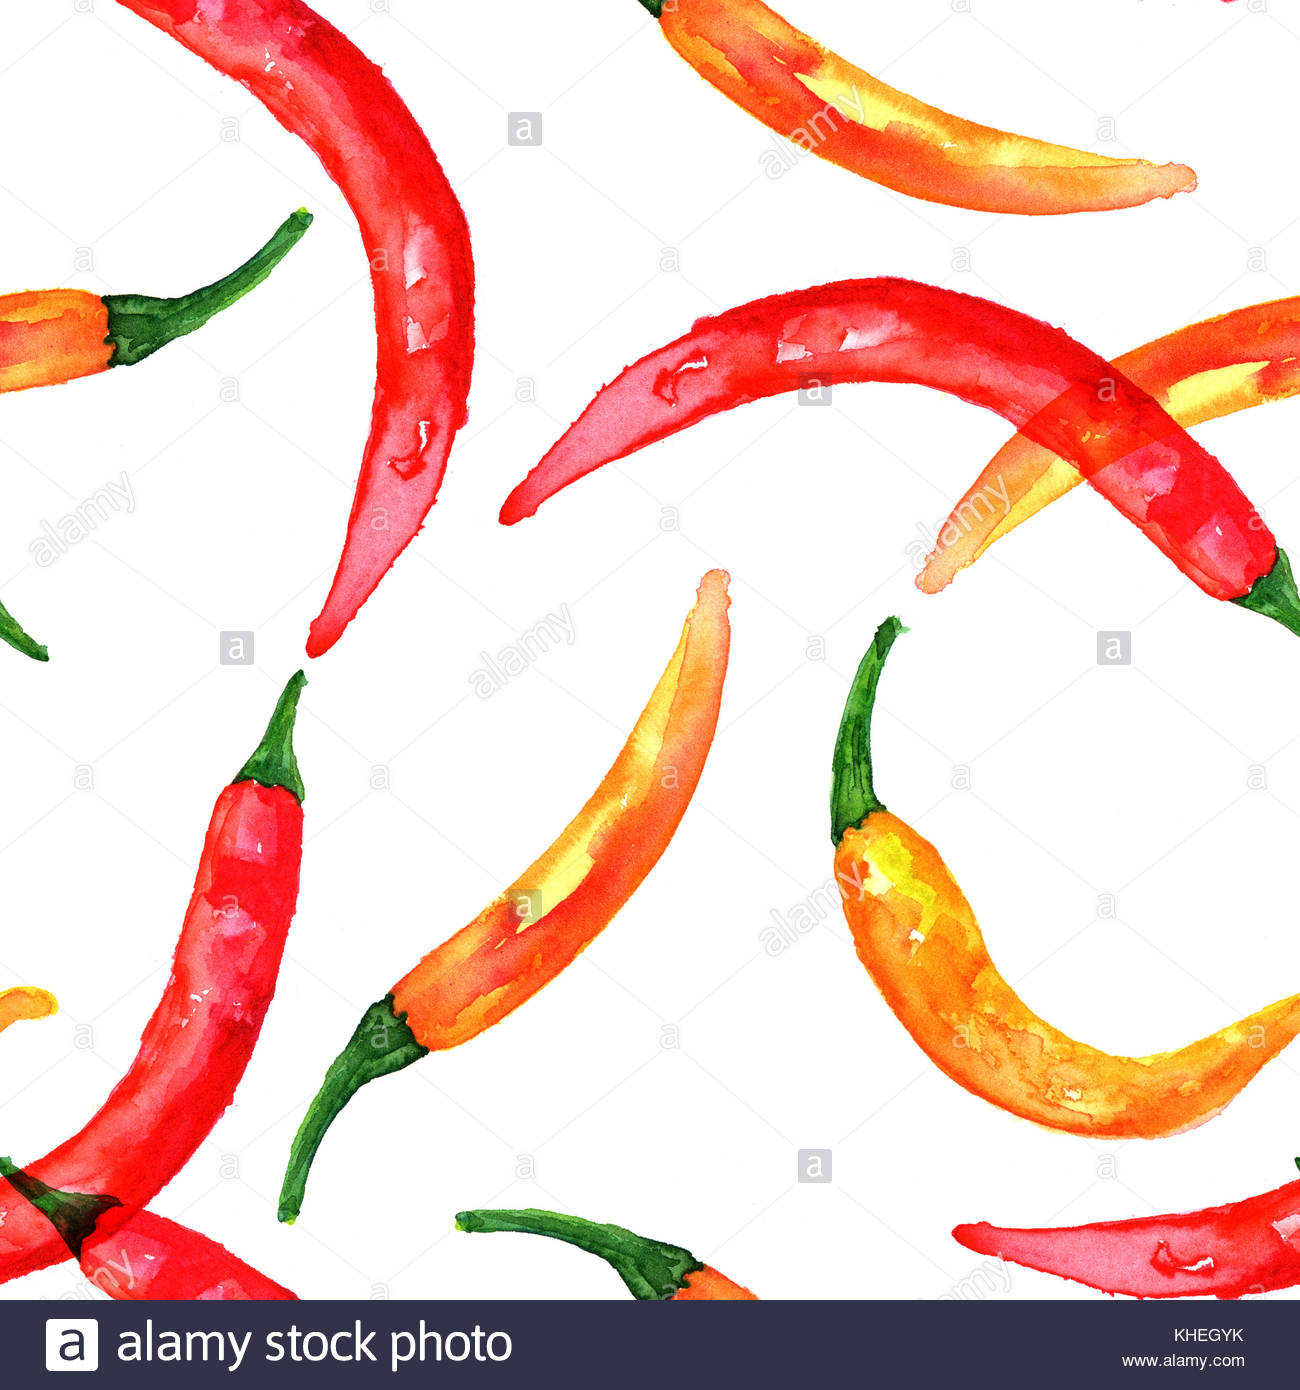 Collection of Chili clipart | Free download best Chili clipart on